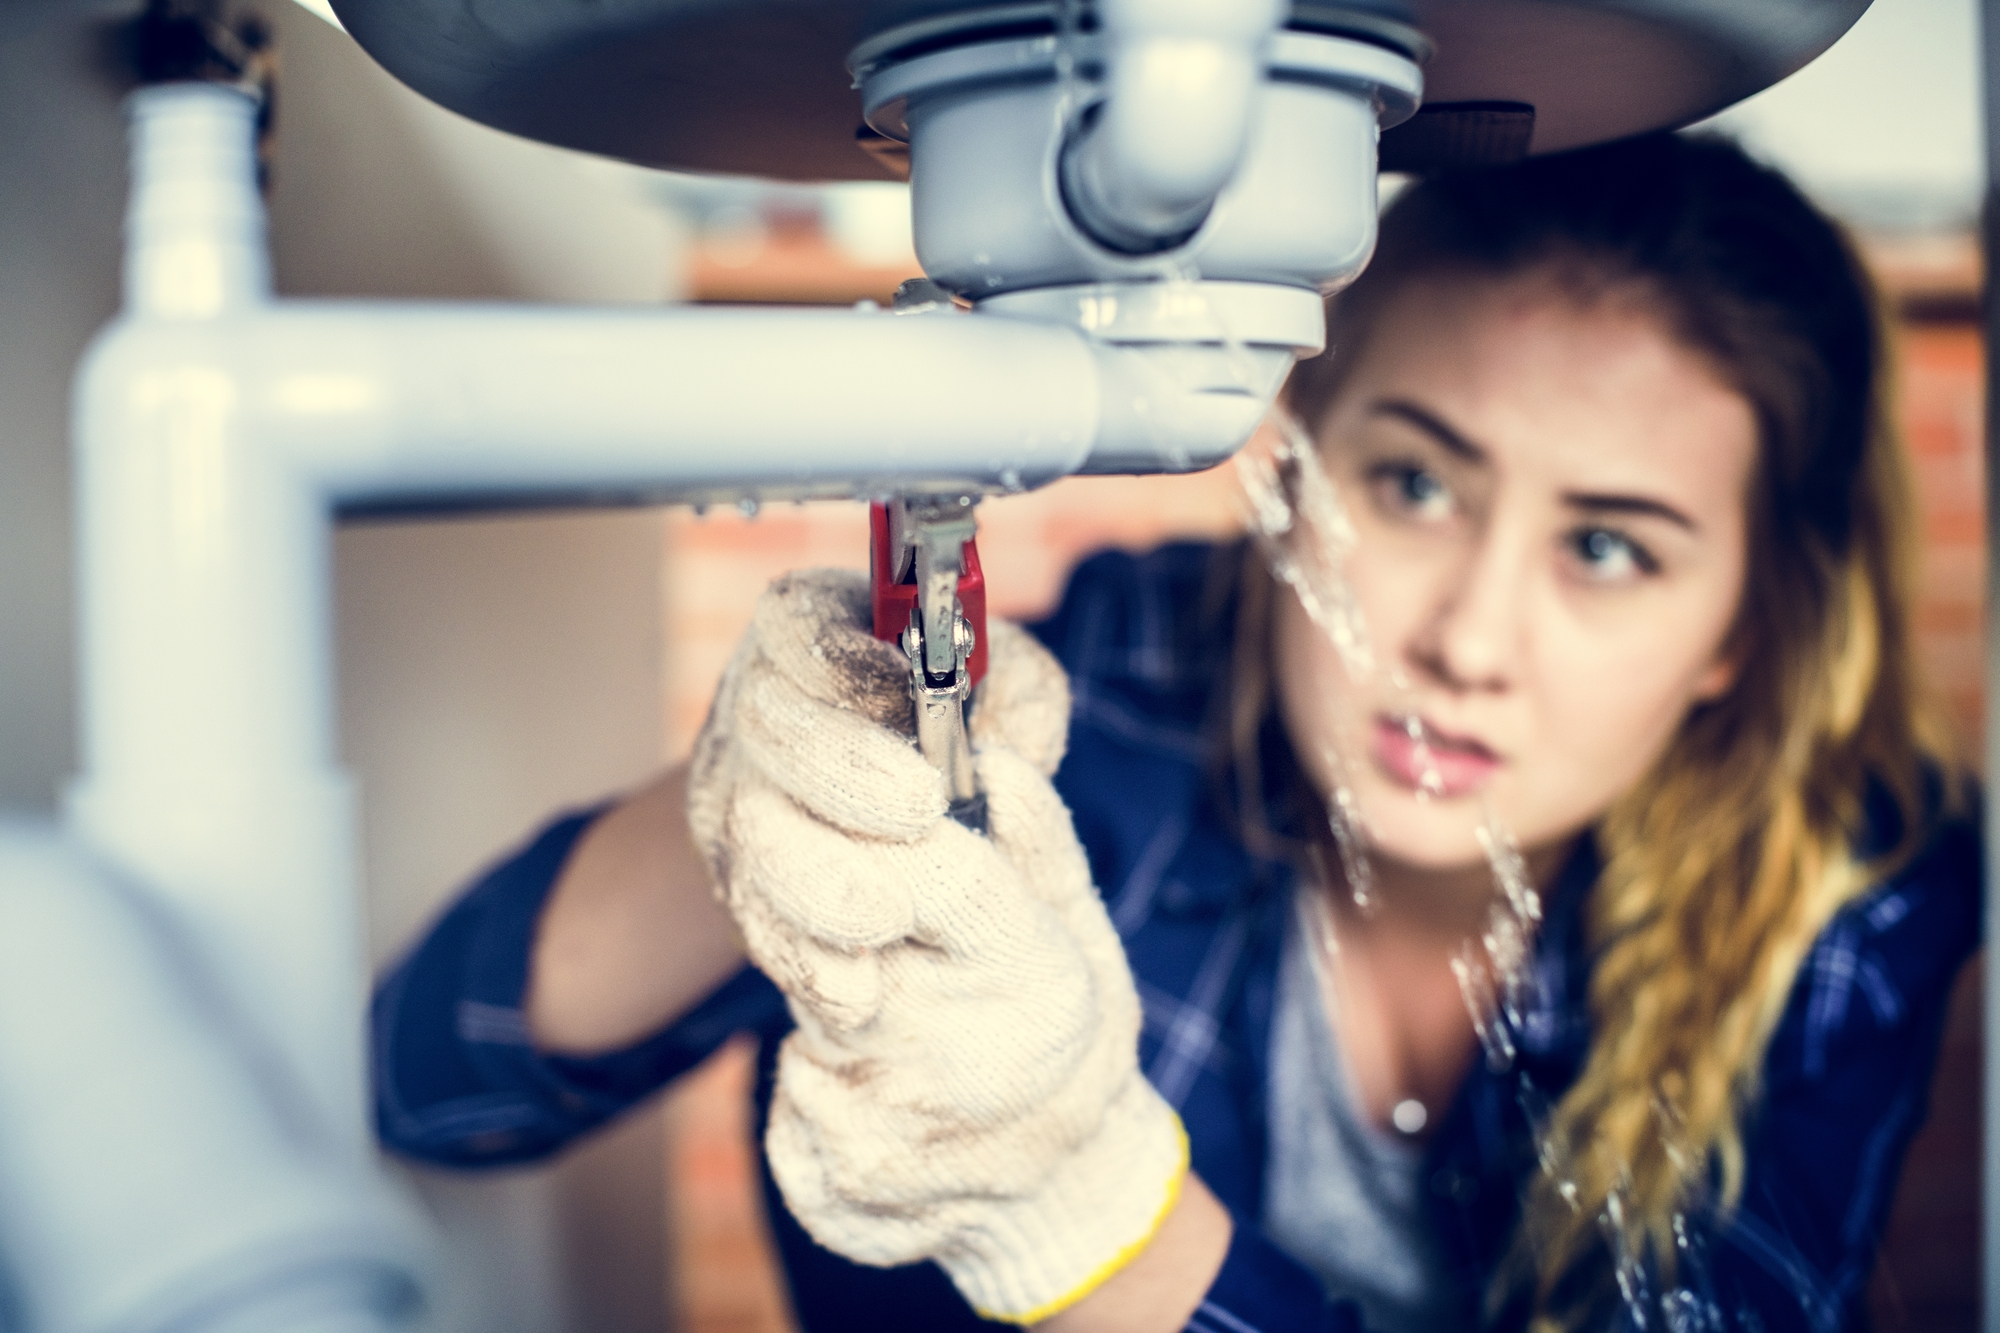 WHAT TO EXPECT FROM YOUR FIRST PLUMBING INSPECTION